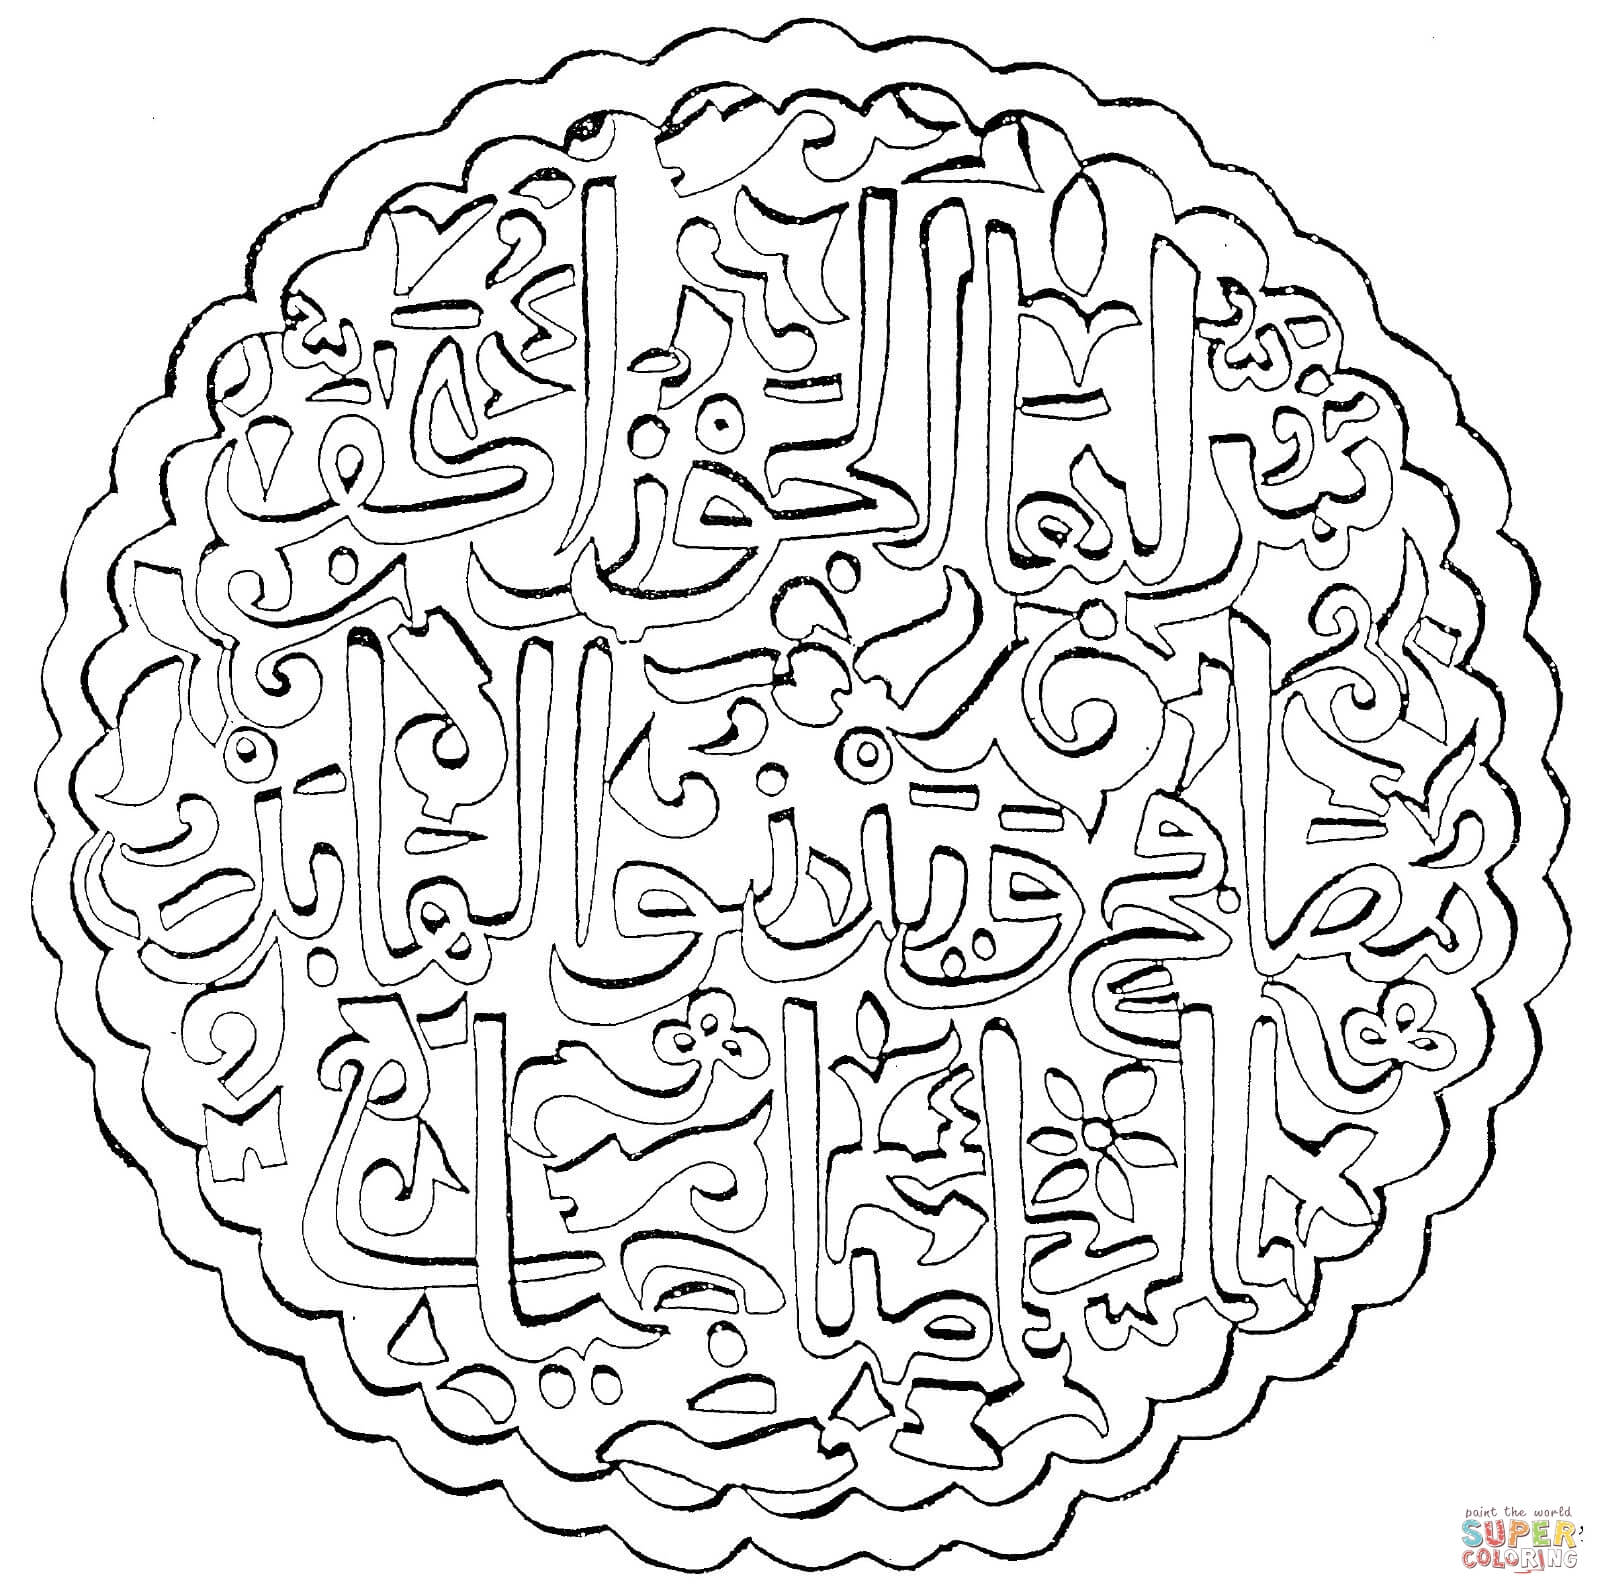 Islamic Ornament Mosaic coloring page | Free Printable Coloring Pages